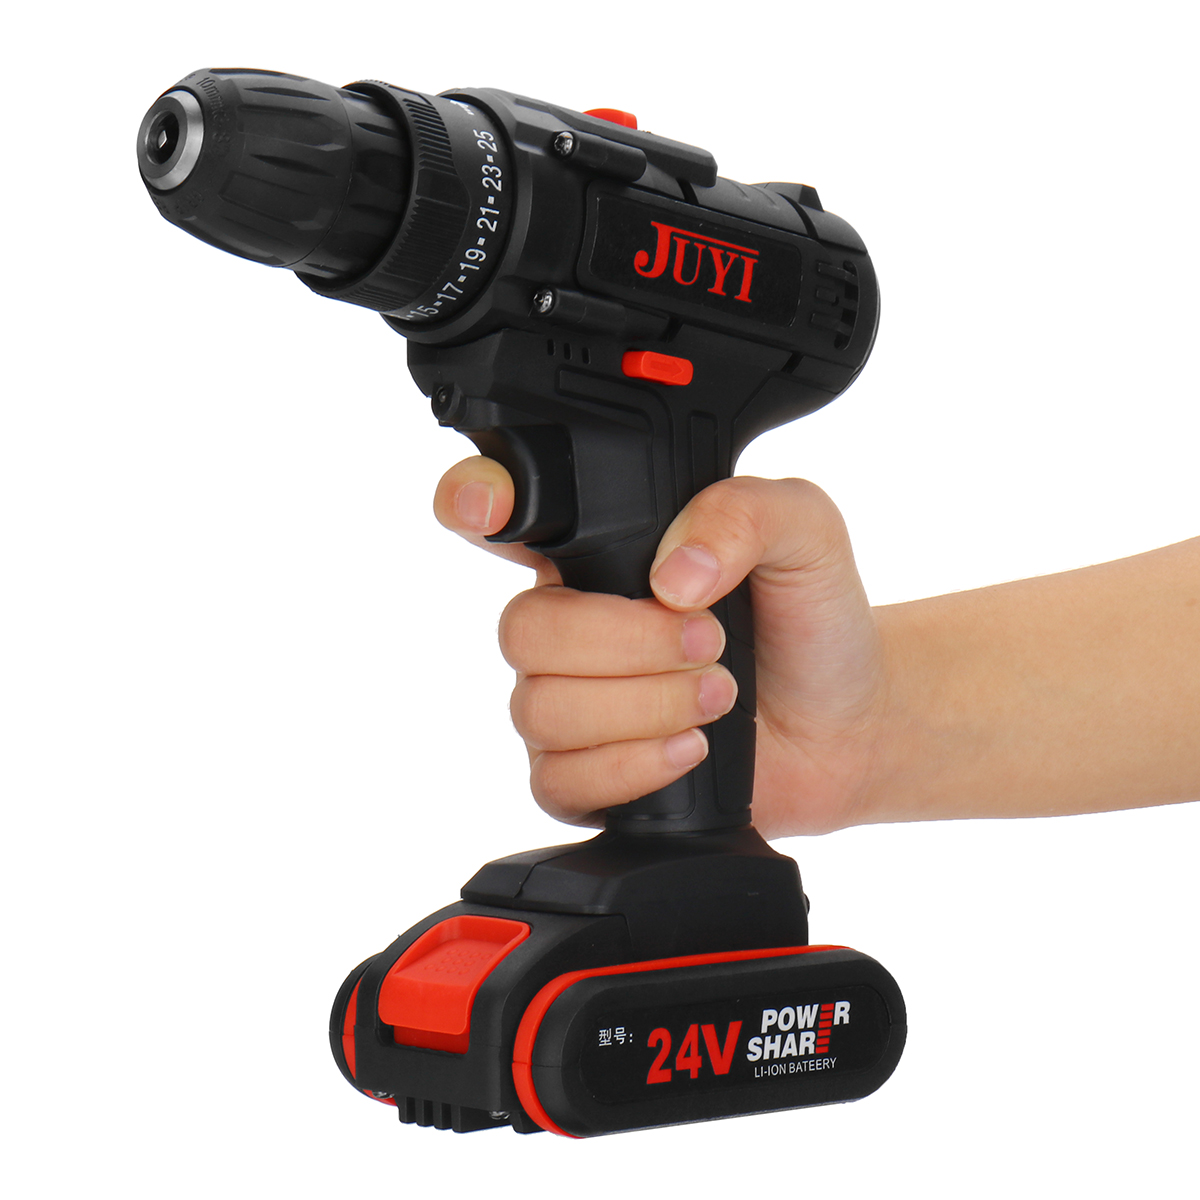 JUYI-12V24V-Lithium-Battery-Power-Drill-Cordless-Rechargeable-2-Speed-Electric-Driver-Drill-Motor-Re-1557976-7